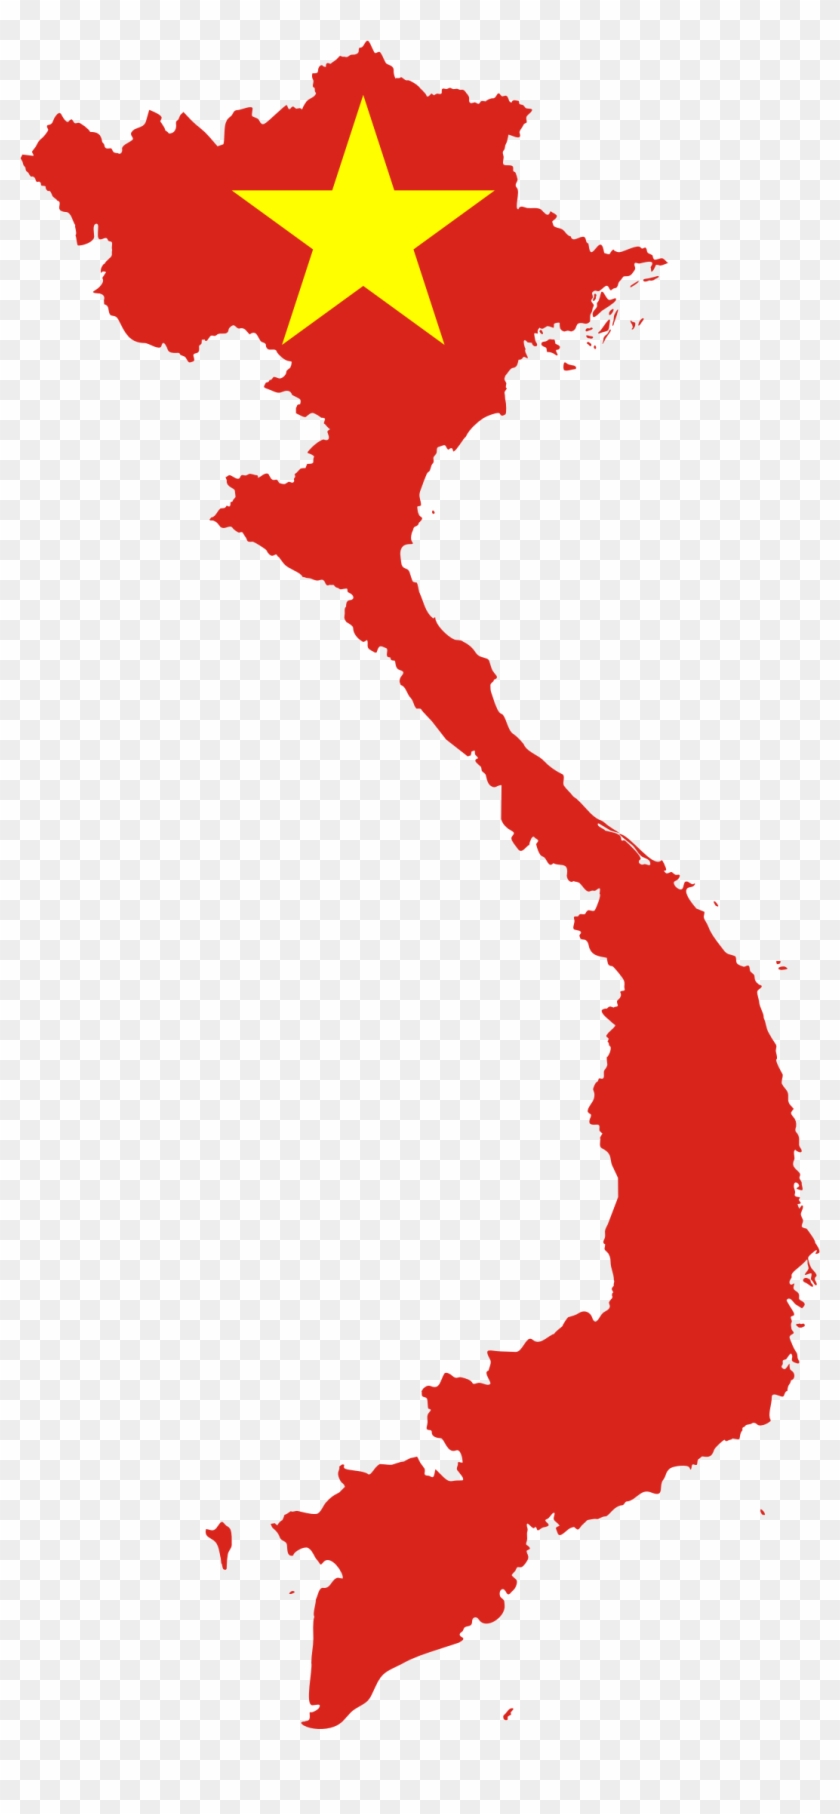 This Free Icons Png Design Of Vietnam Map Flag - Vietnam Map With Flag Clipart